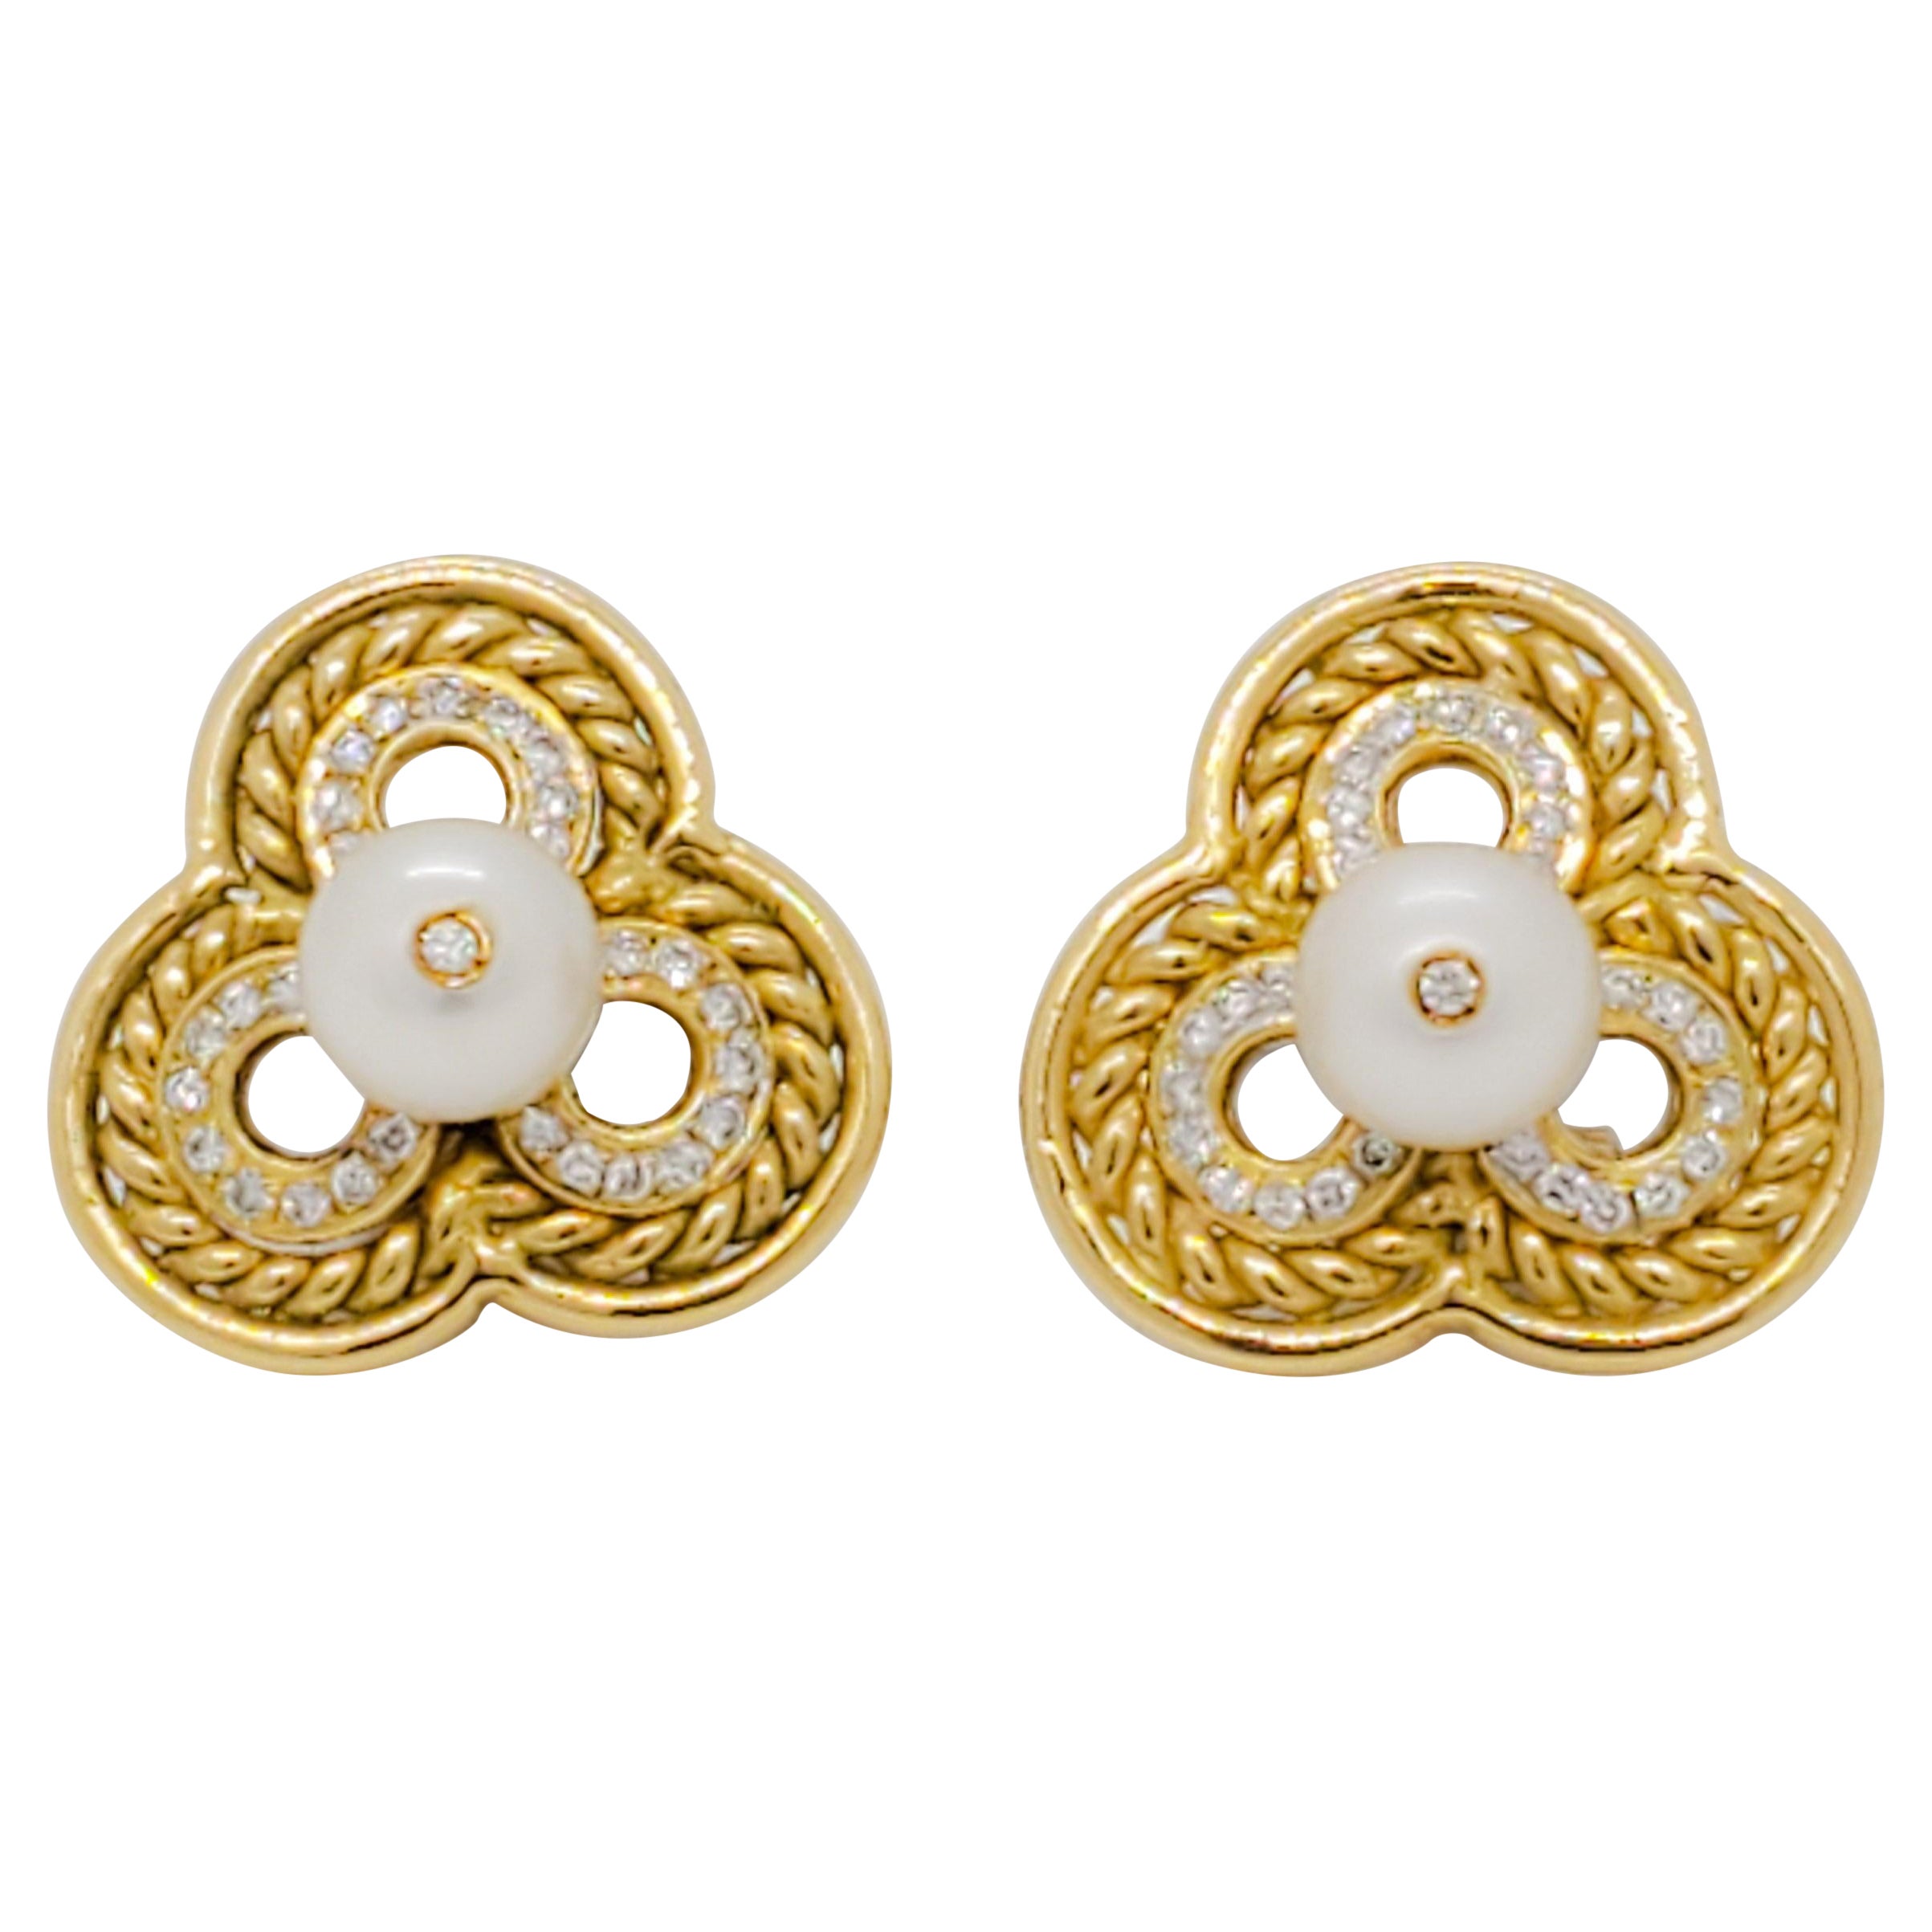 White Pearl and Diamond Earring Clips in 18k Yellow Gold